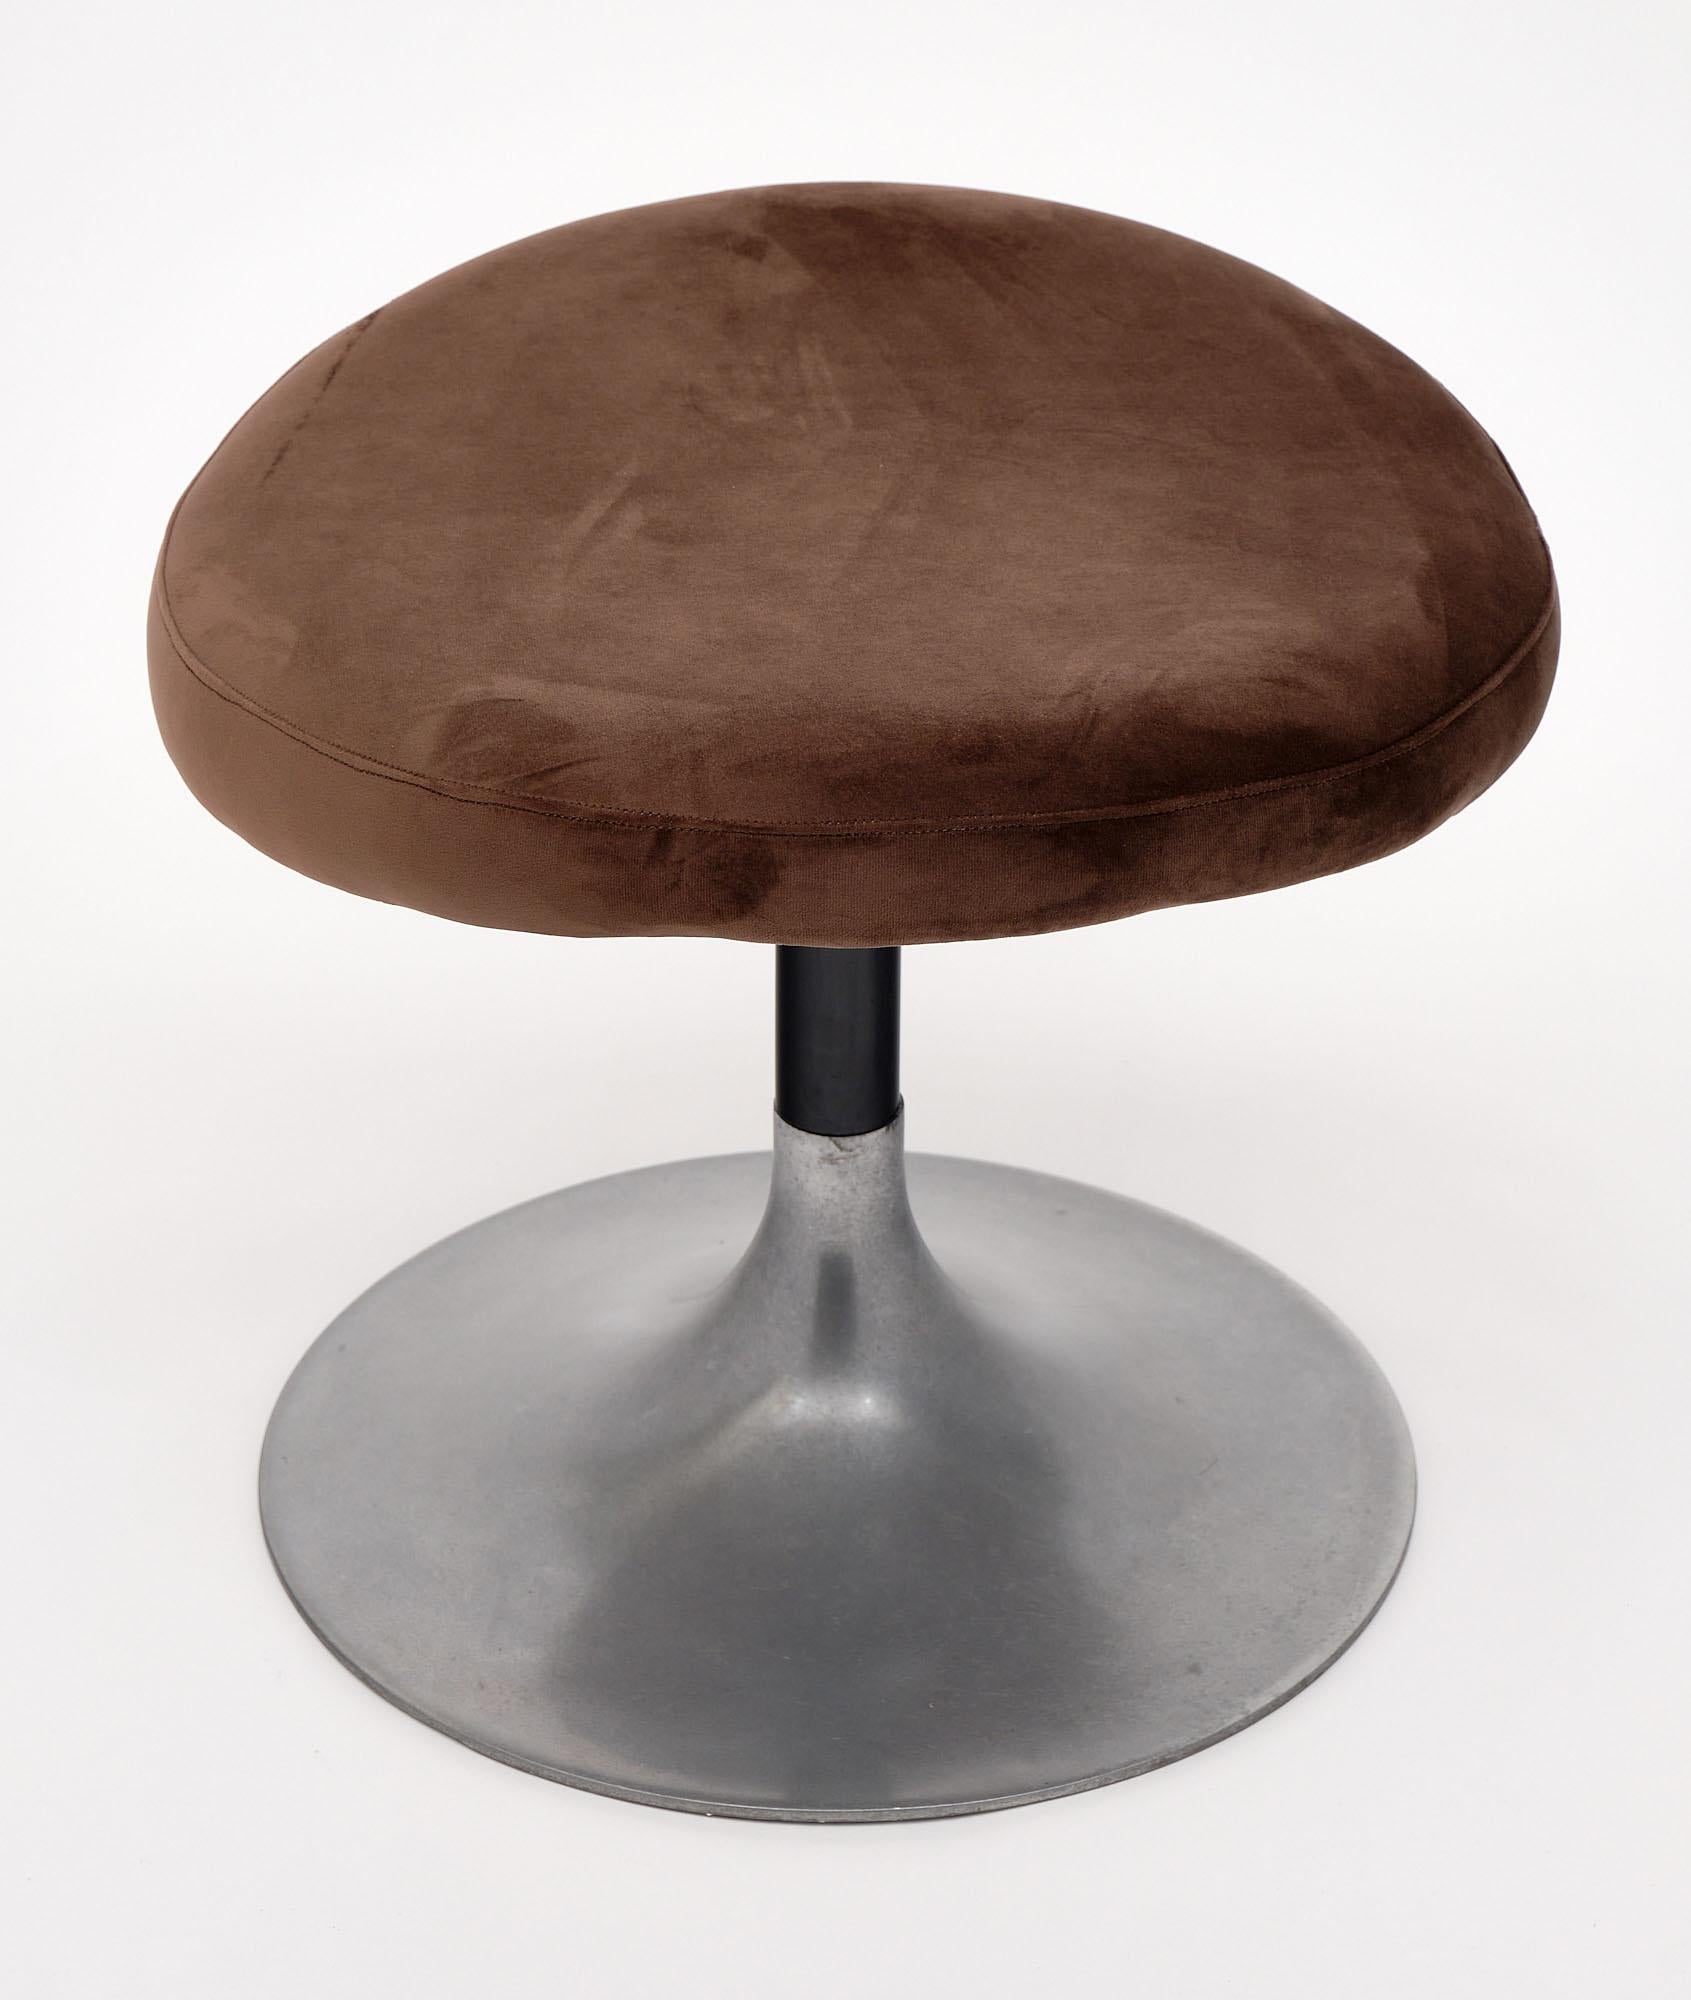 Pair of stools from Italy. Each modernist stool has a circular base of aluminum alloy. The curvilinear seat has been newly upholstered in a chocolate brown. Originally a set of four (as pictured) though only the dark brown stools are still available.